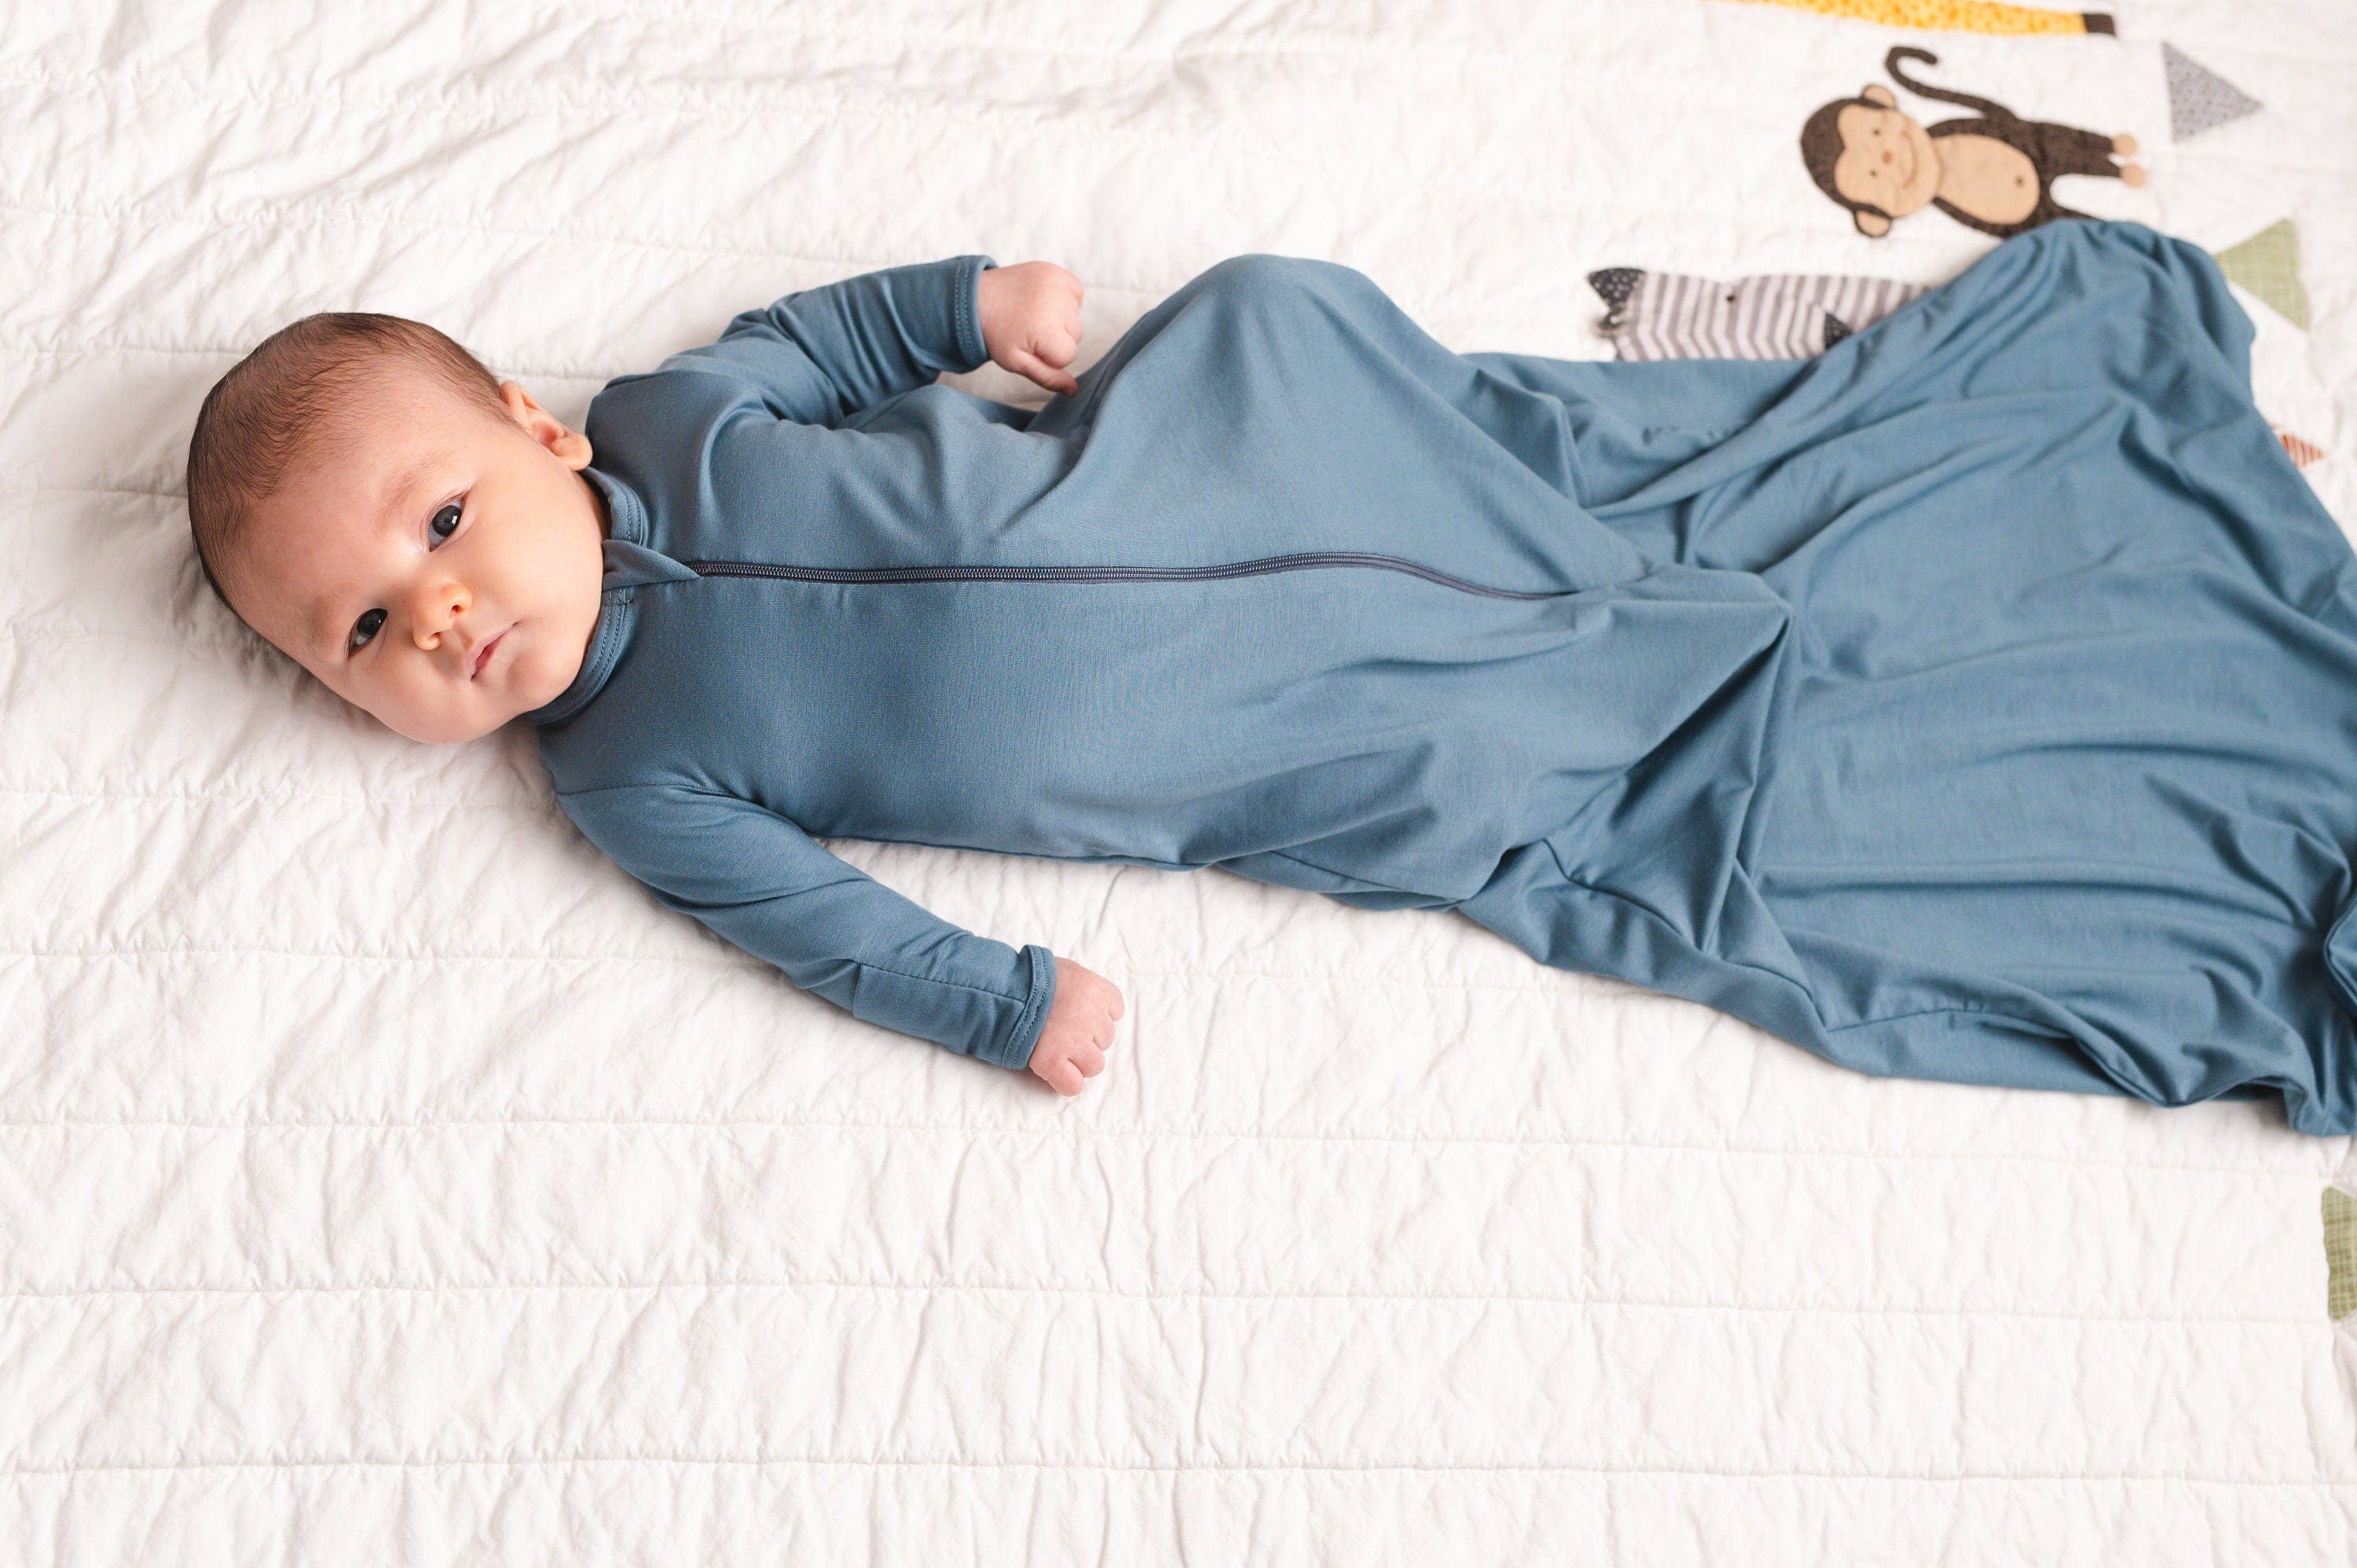 DROPPING FRIDAY! Knotted Sleepsack, Soft Baby Pajamas, Zipper Baby Pajamas with Cuffs, Baby Nightgown,Soft Baby Gown,Baby Gift,Babyshower